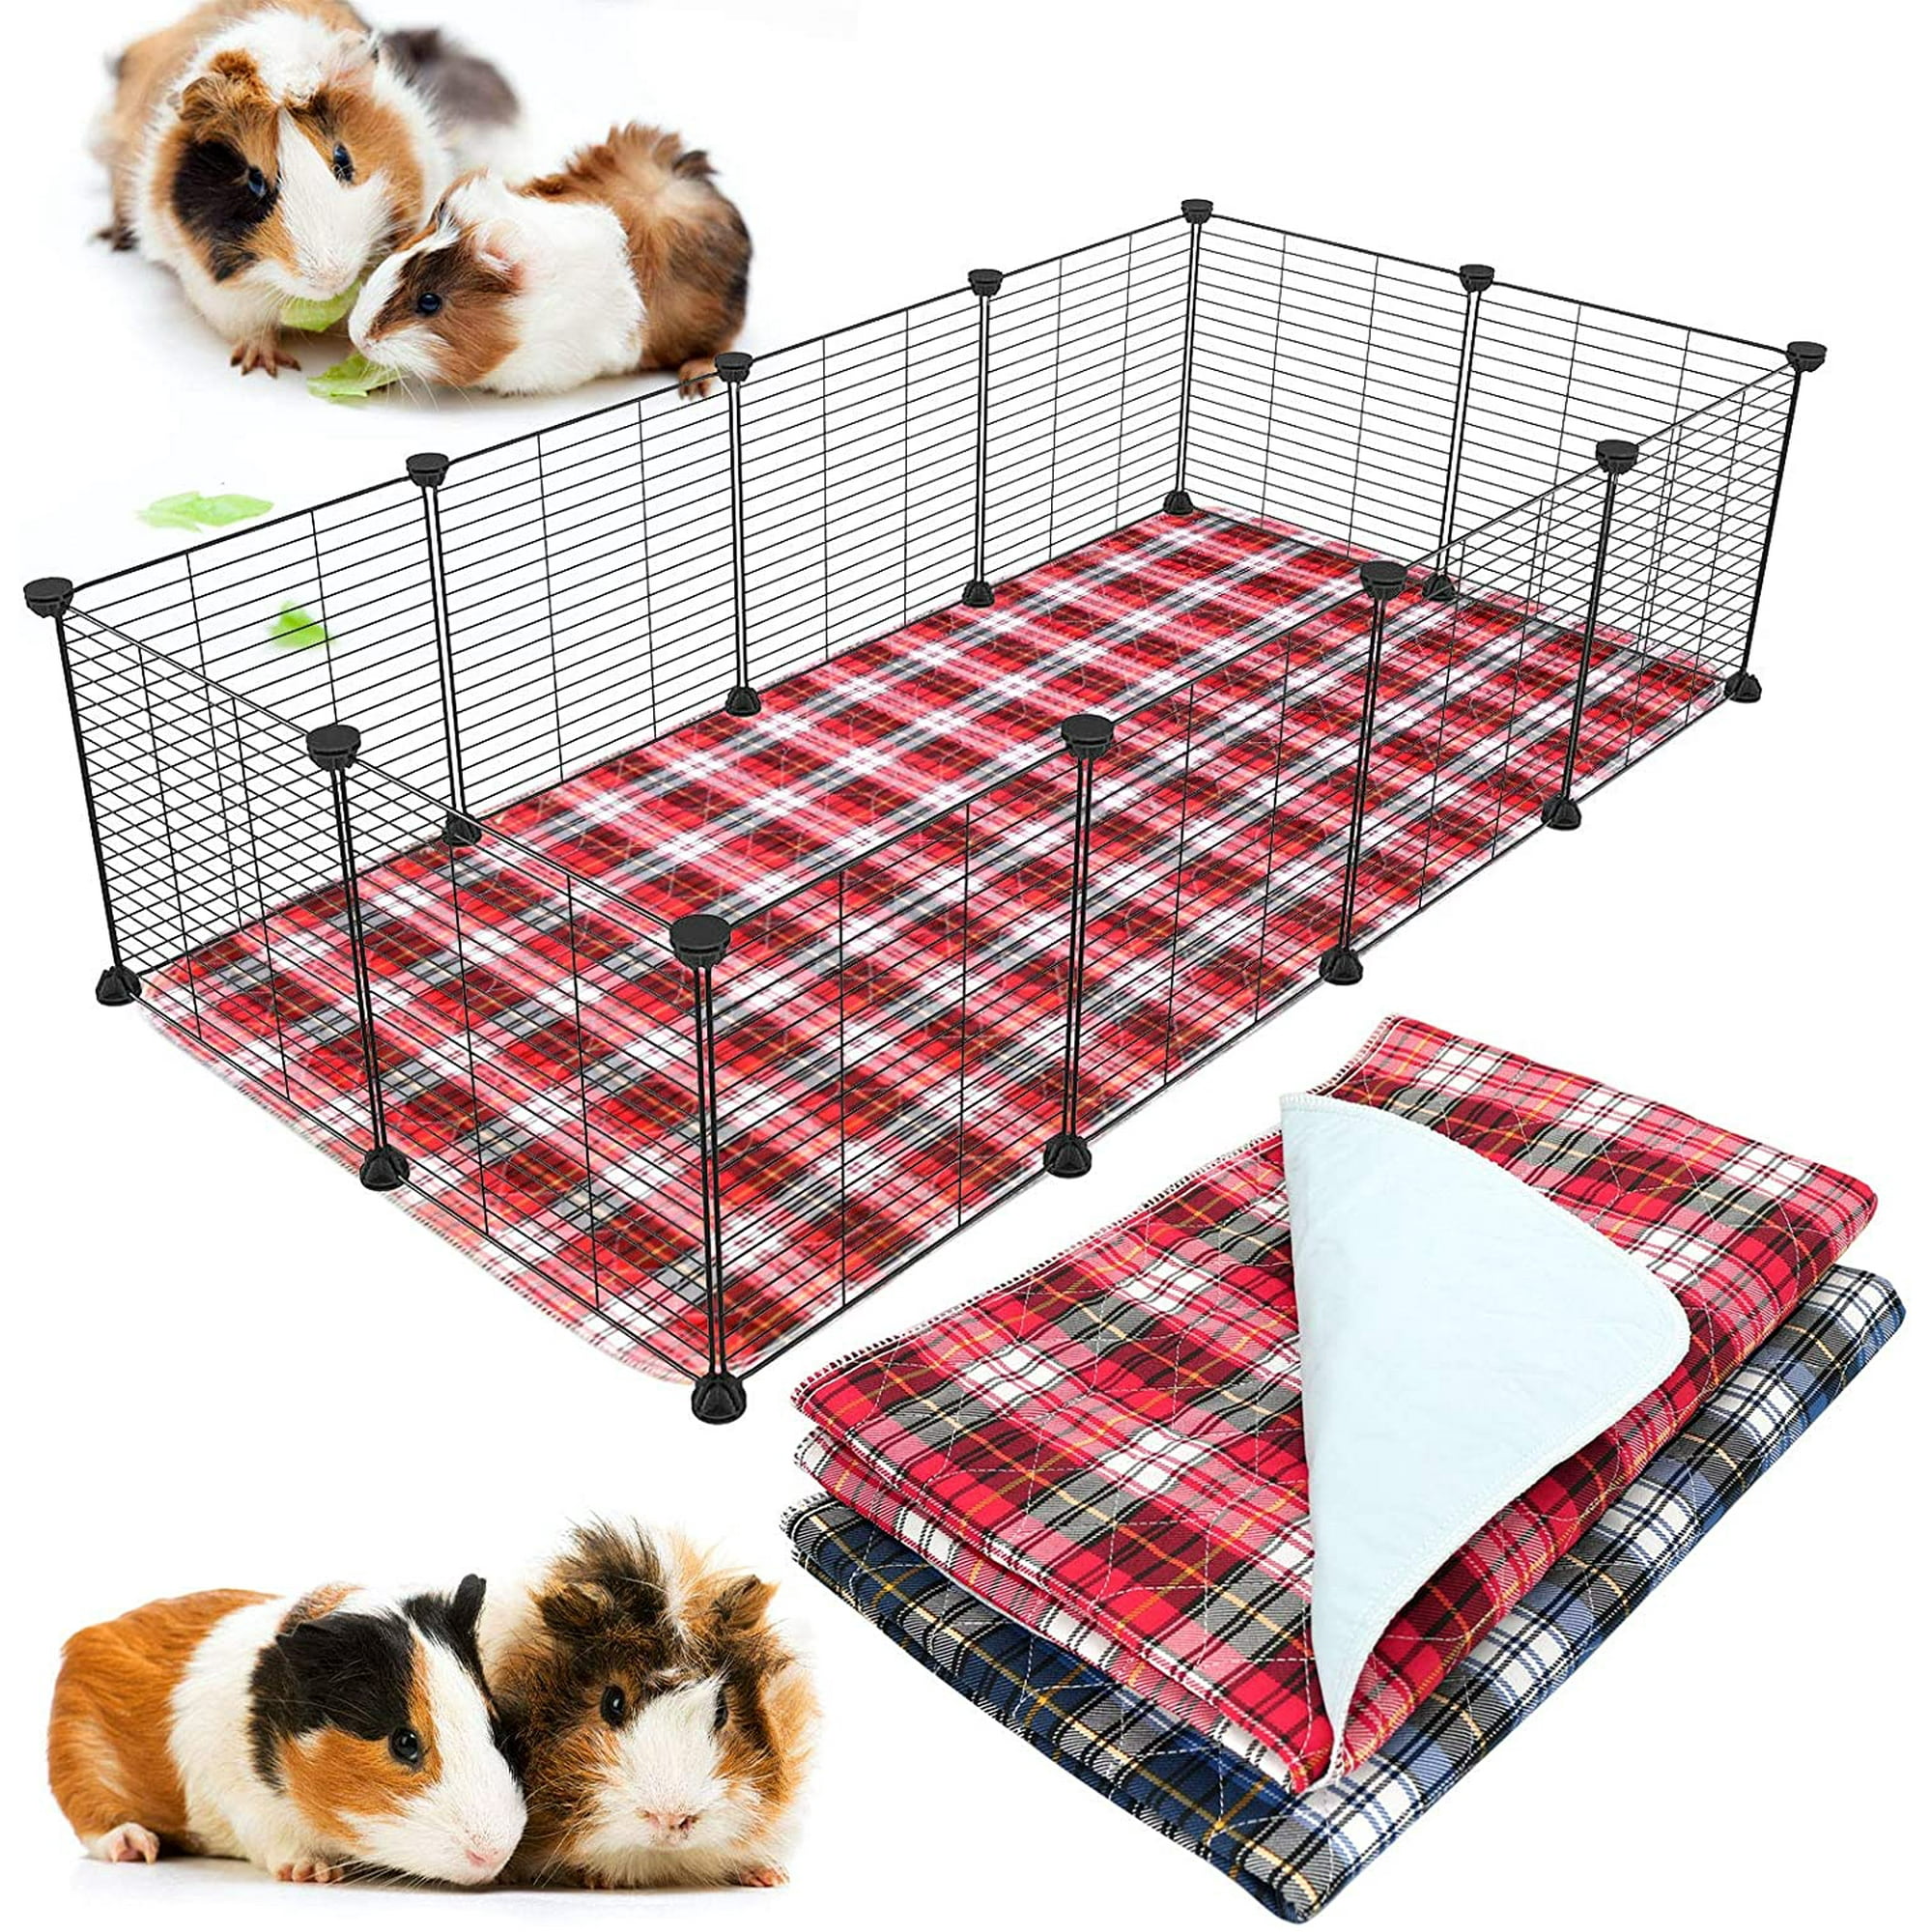 2 Pack Guinea Pig Cage Liners Washable Guinea Pig Bedding Reusable  Waterproof Anti Slip Pee Pads Super Absorbent Cage Liners for Guinea Pigs  Hamsters Rabbits & All Small AnimalsExtra Large | Walmart Canada